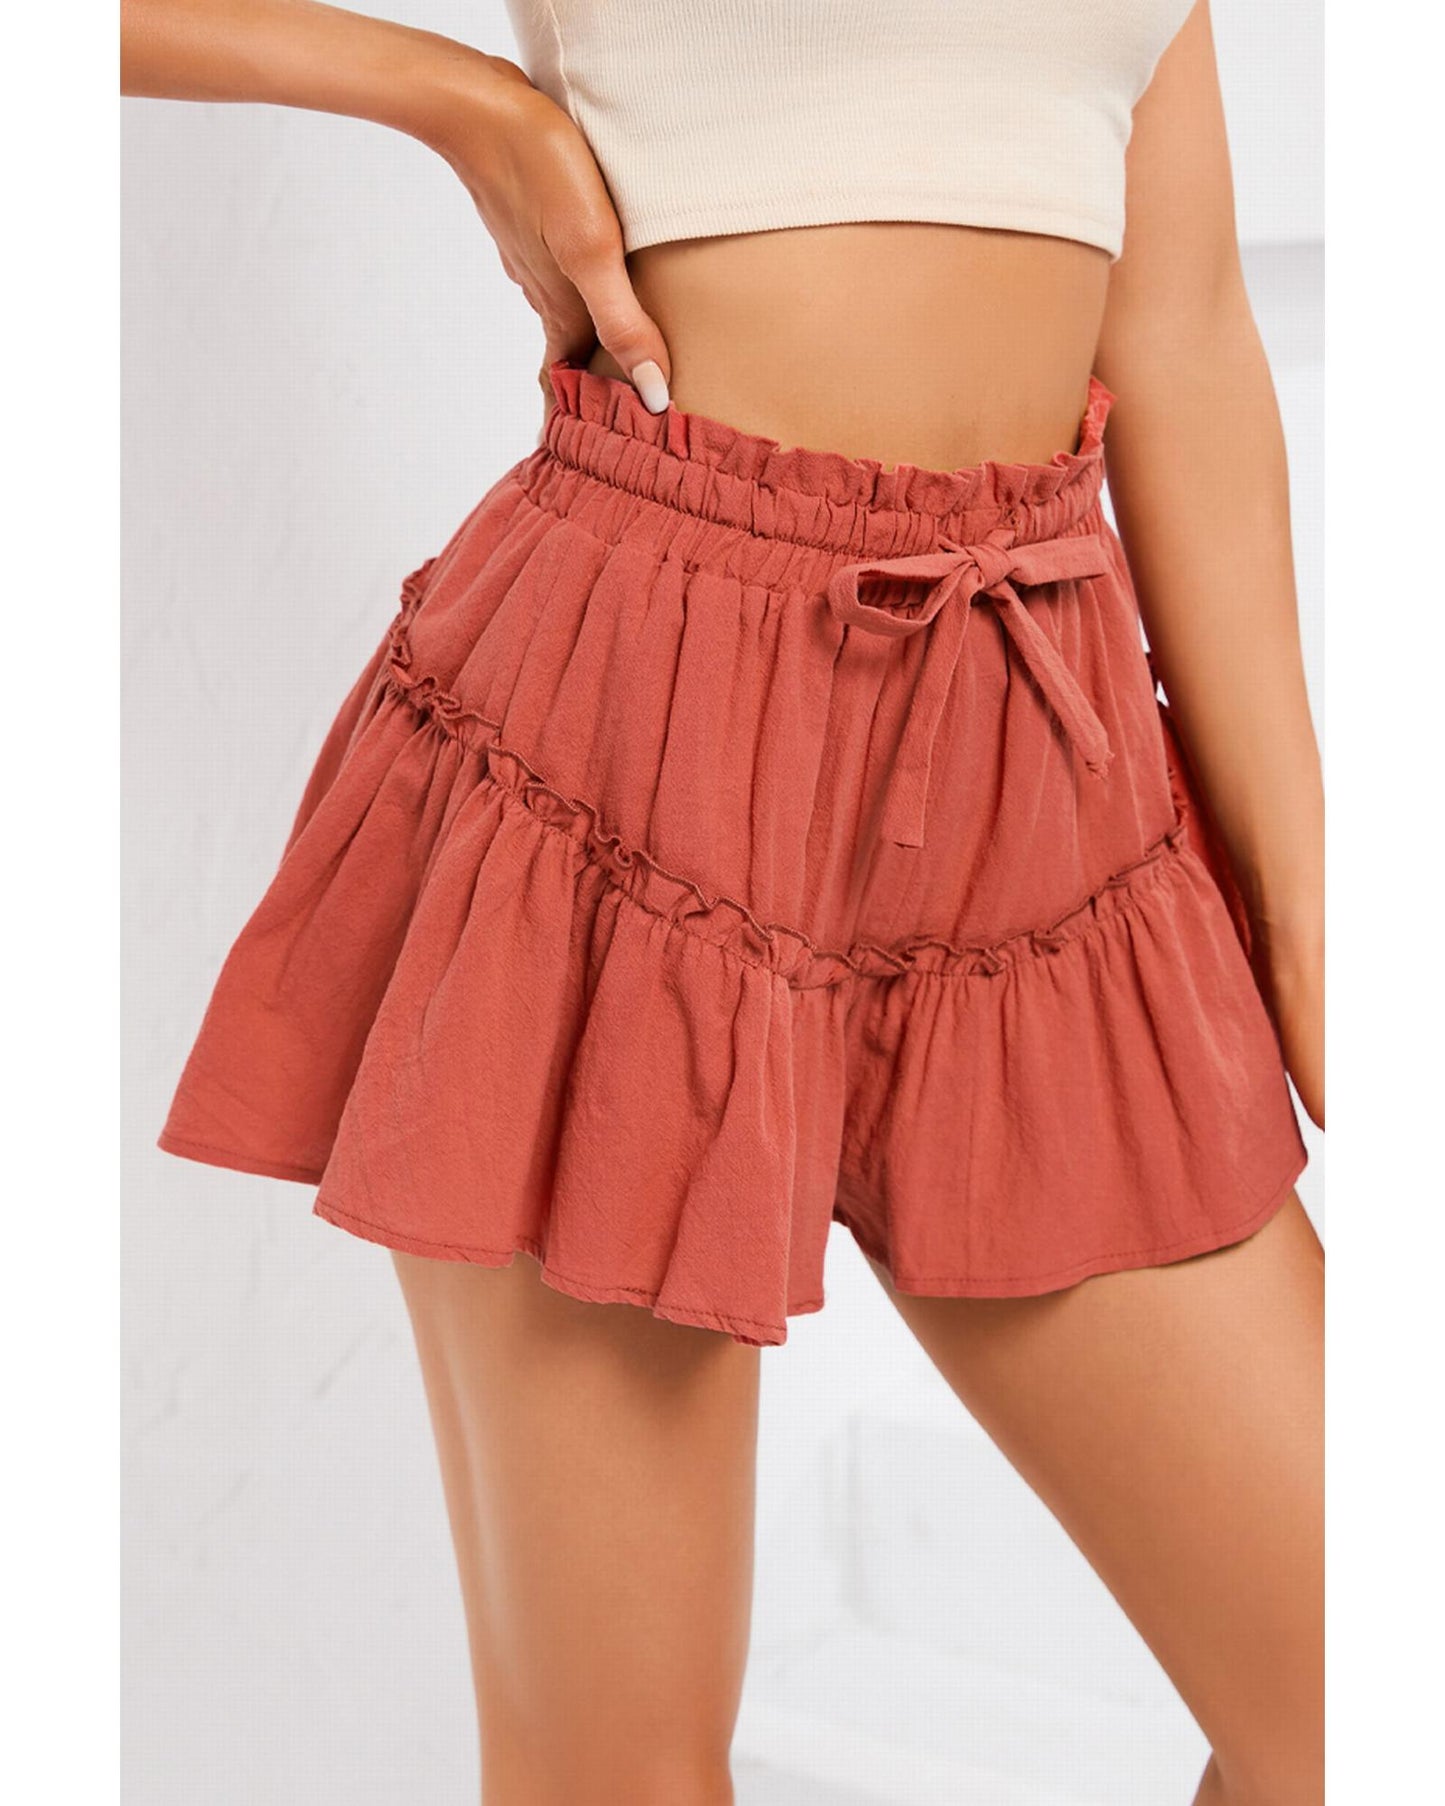 Azura Exchange Belted Frill Trim Casual Shorts - L